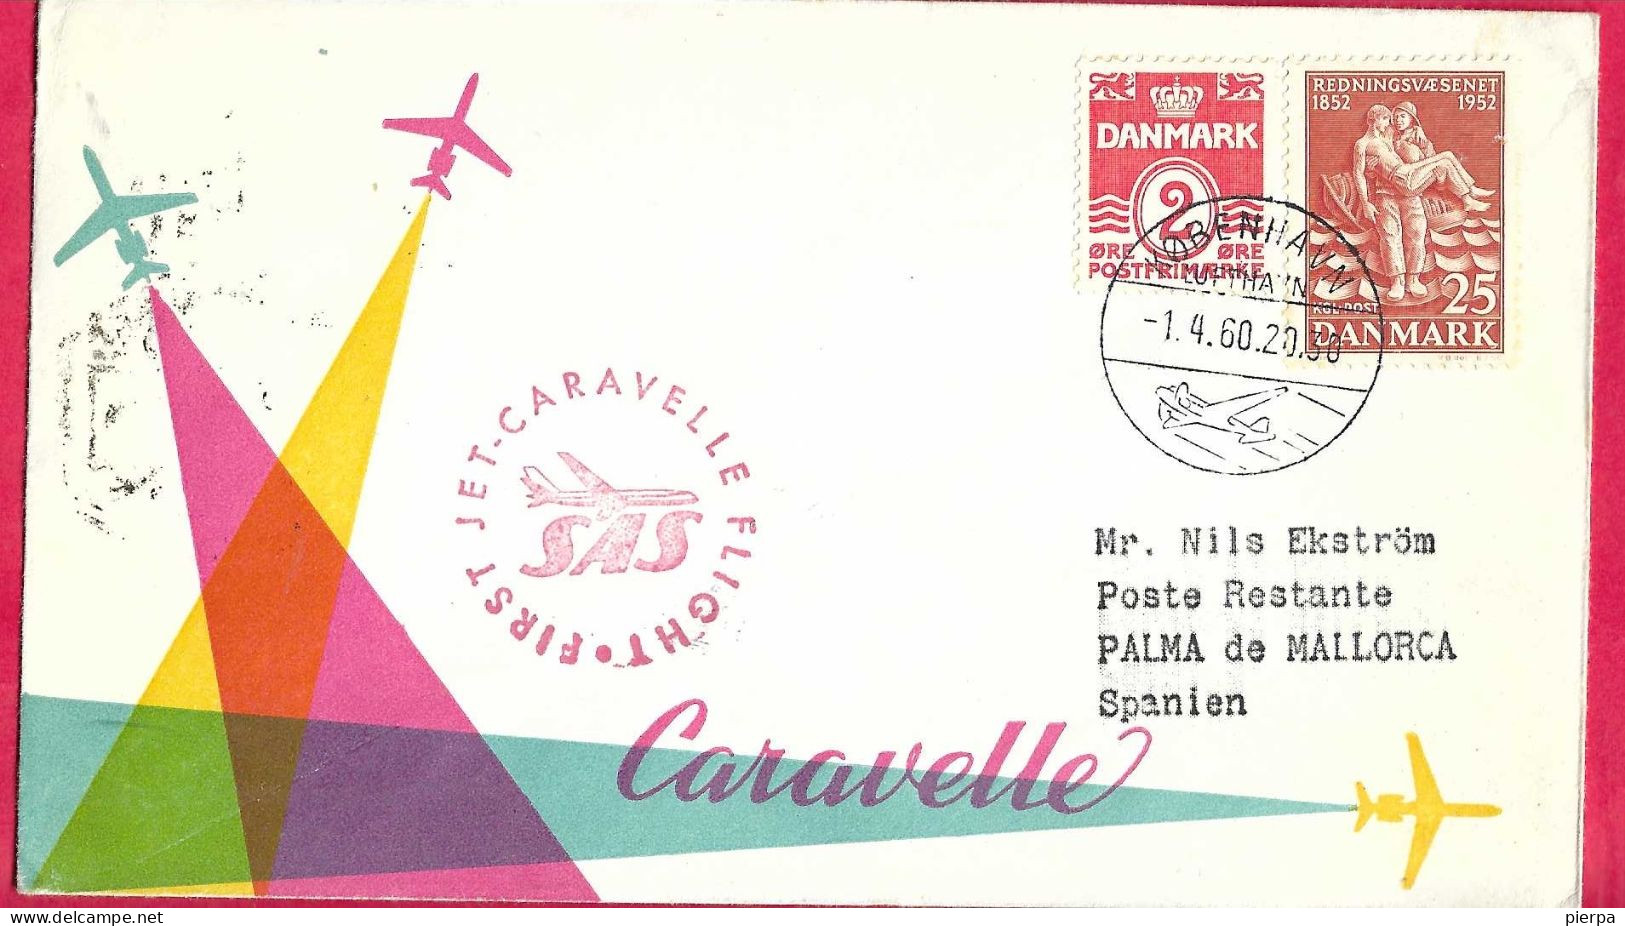 DANMARK - FIRST CARAVELLE FLIGHT - SAS - FROM KOBENHAVN TO PALMA DE MAIORCA *1.4.60* ON OFFICIAL COVER - Airmail